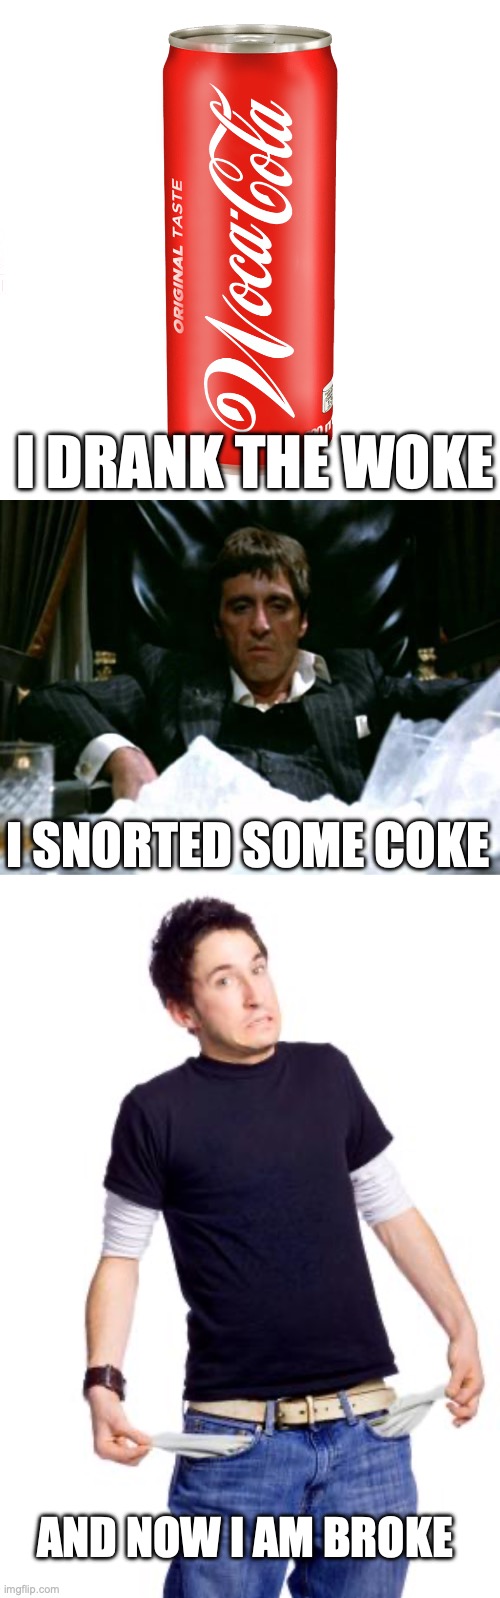 I Was an Ordinary Bloke | I DRANK THE WOKE; I SNORTED SOME COKE; AND NOW I AM BROKE | image tagged in woca-cola,scarface cocaine,broke man | made w/ Imgflip meme maker